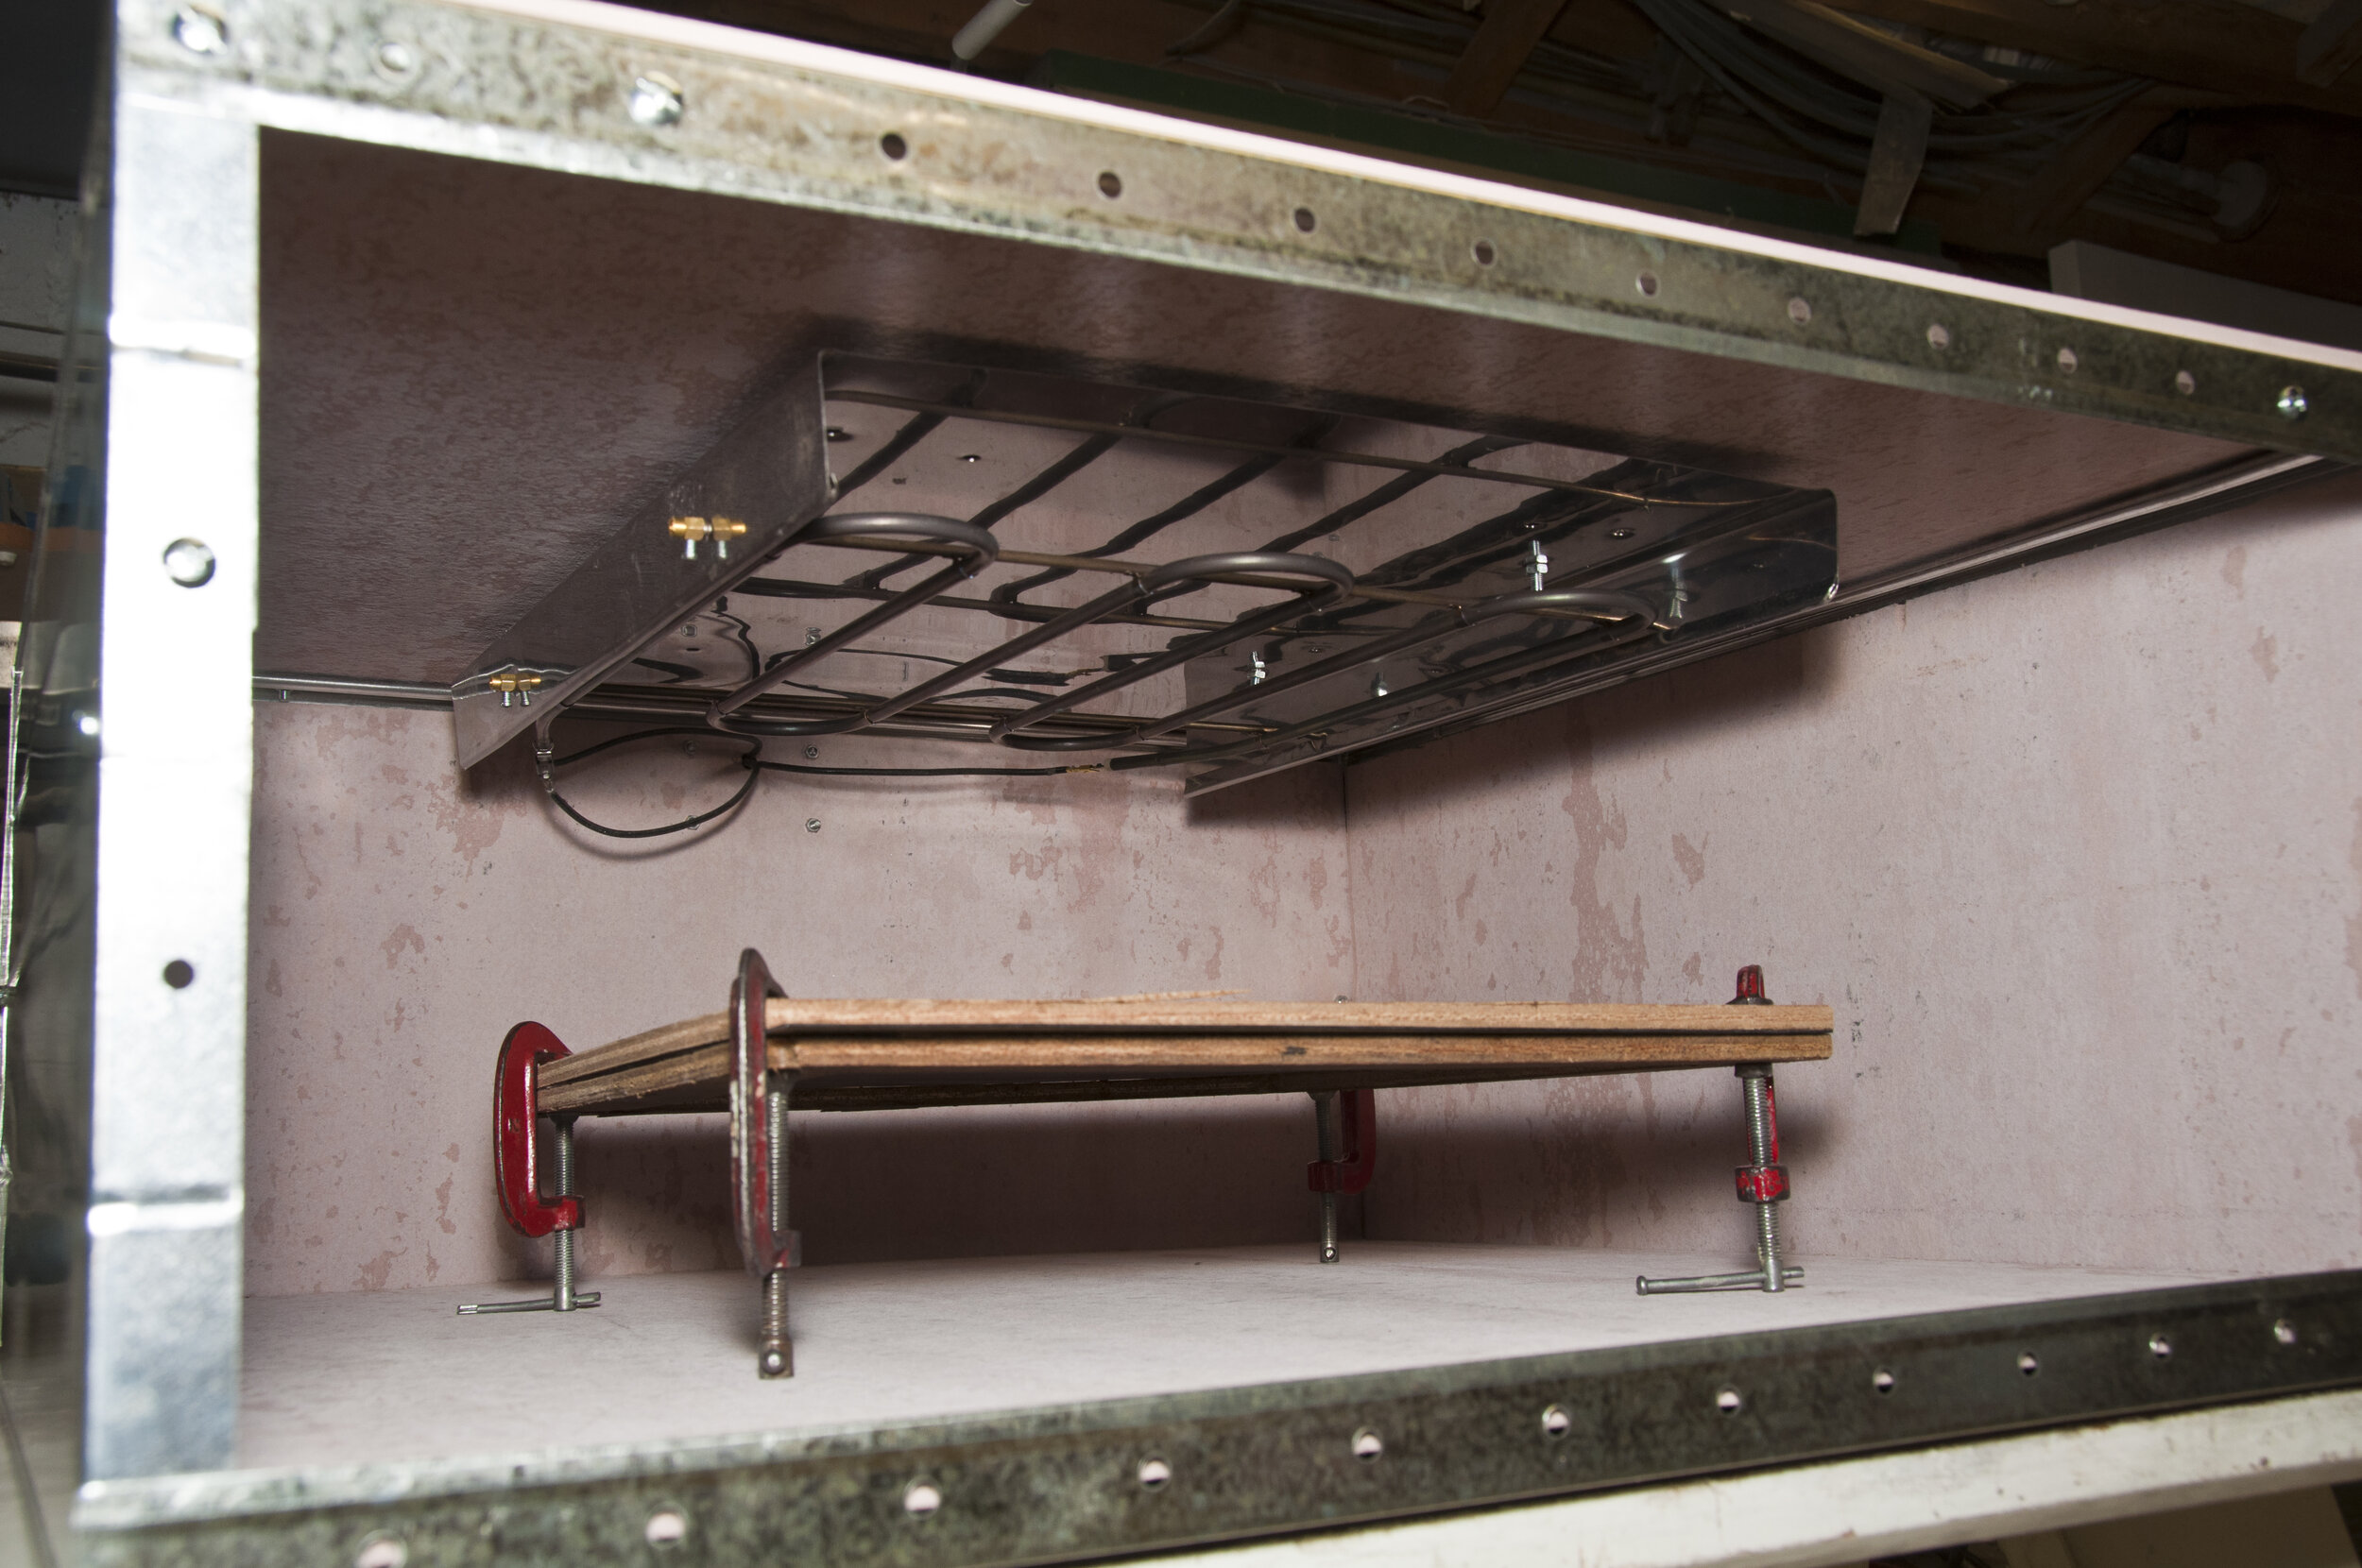 Home-built moulding oven. Element is bolted to the reﬂector